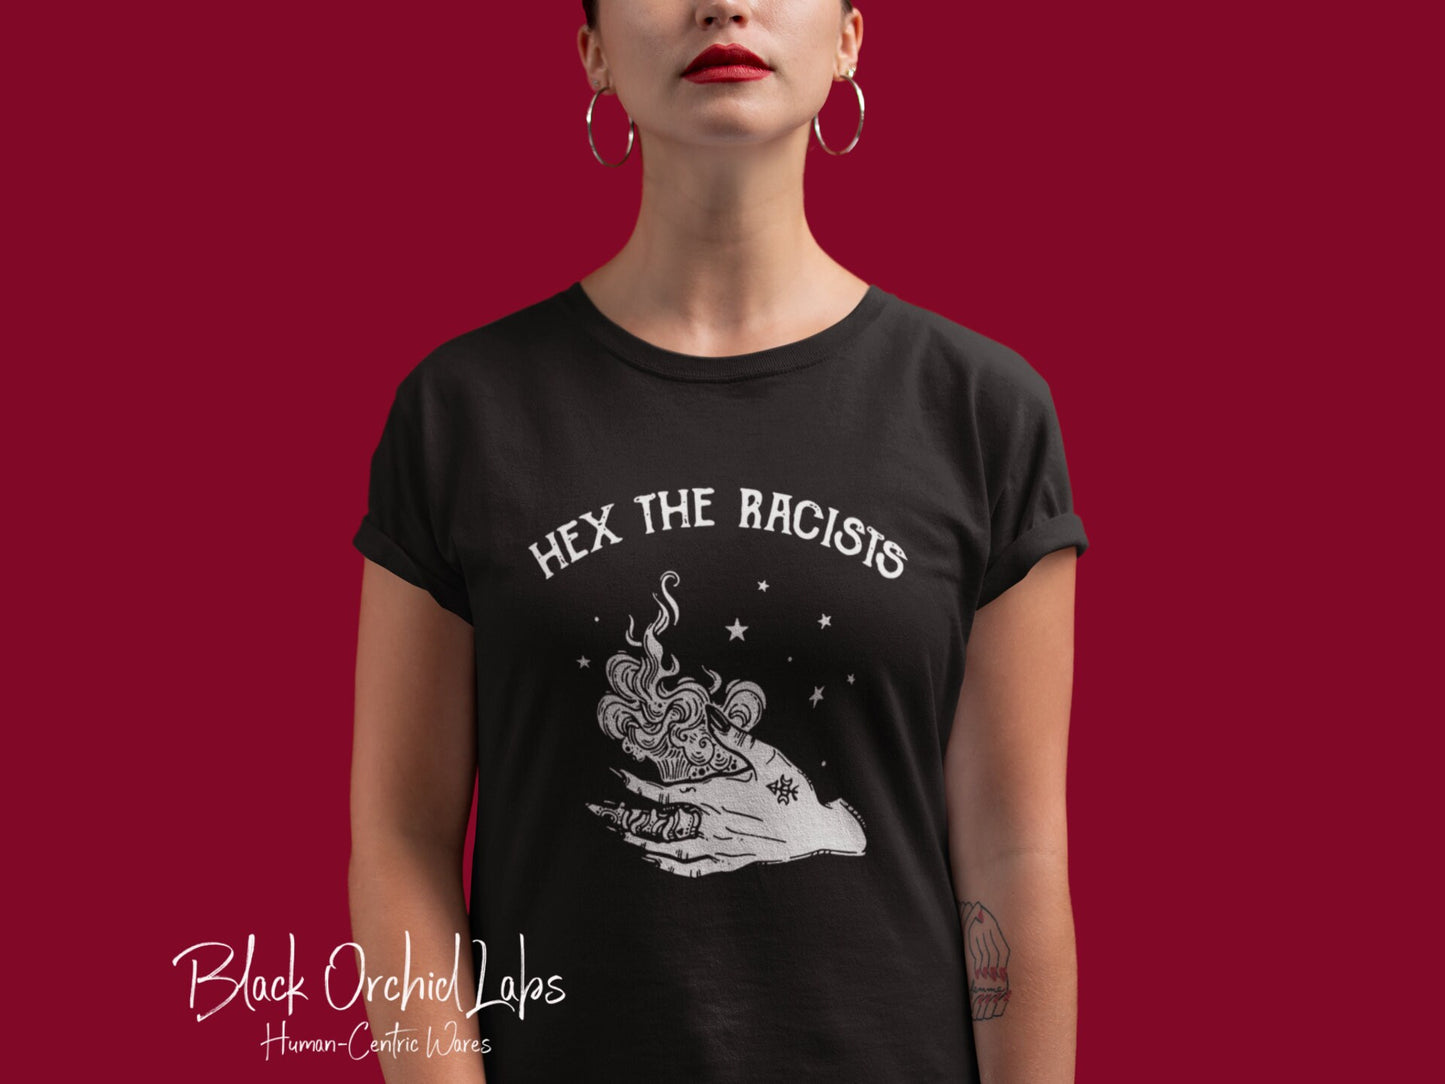 Hex the Racists T-shirt, Tank, Hoodie, or Tote, Equality, anti-racist, black lives matter, gothic, witchy vibes, protest shirt